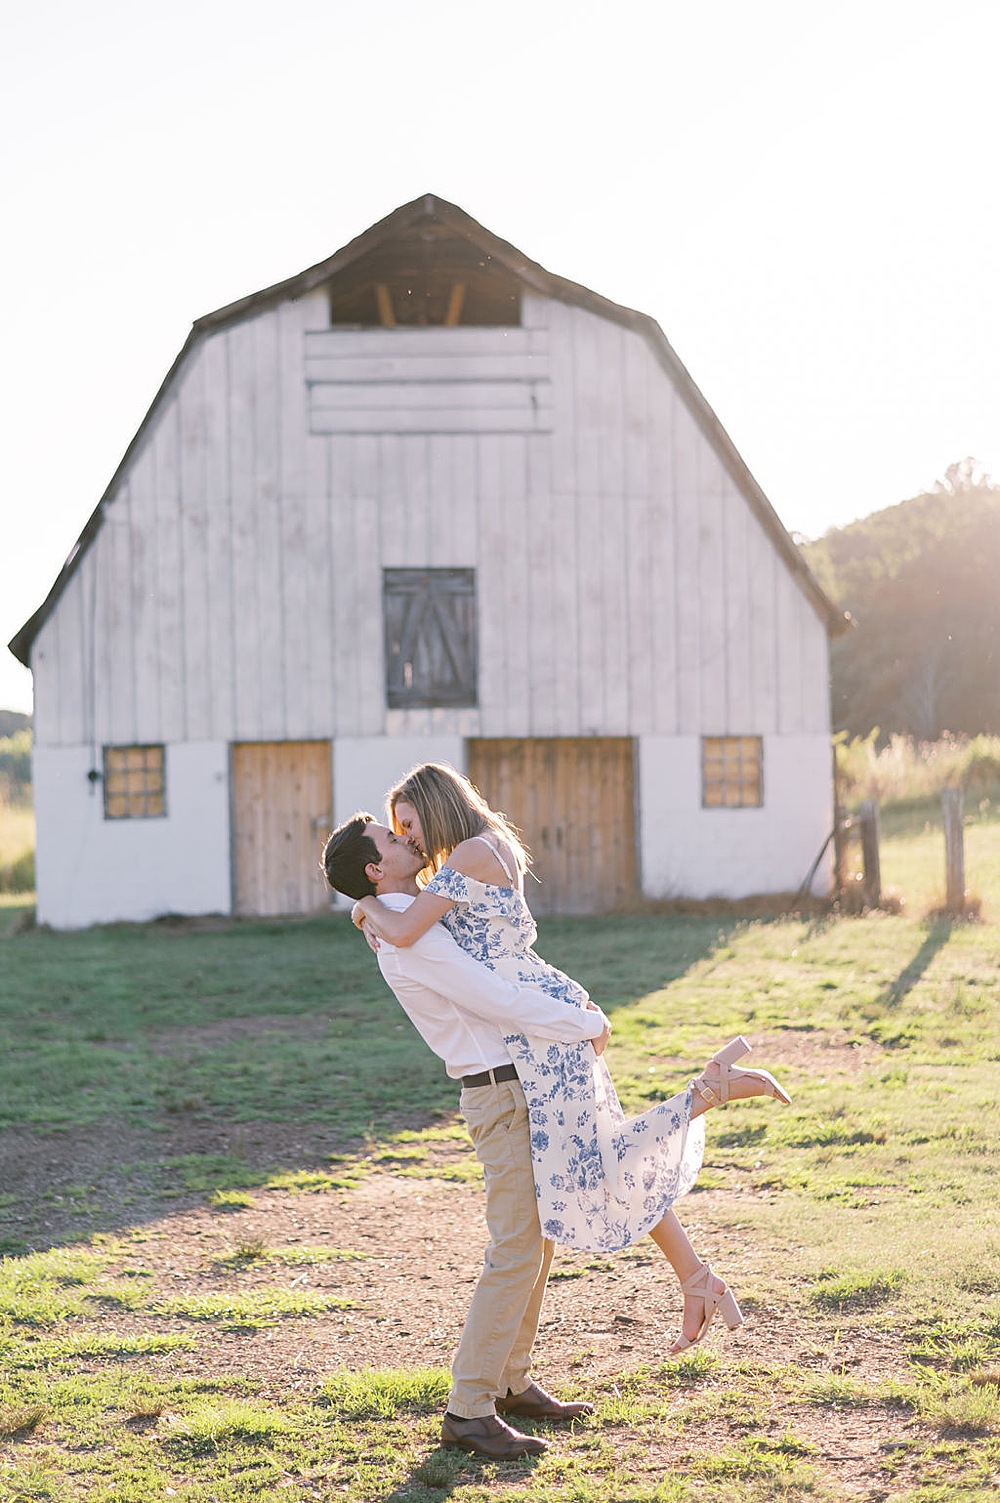 Romantic Summer Engagement in a Field